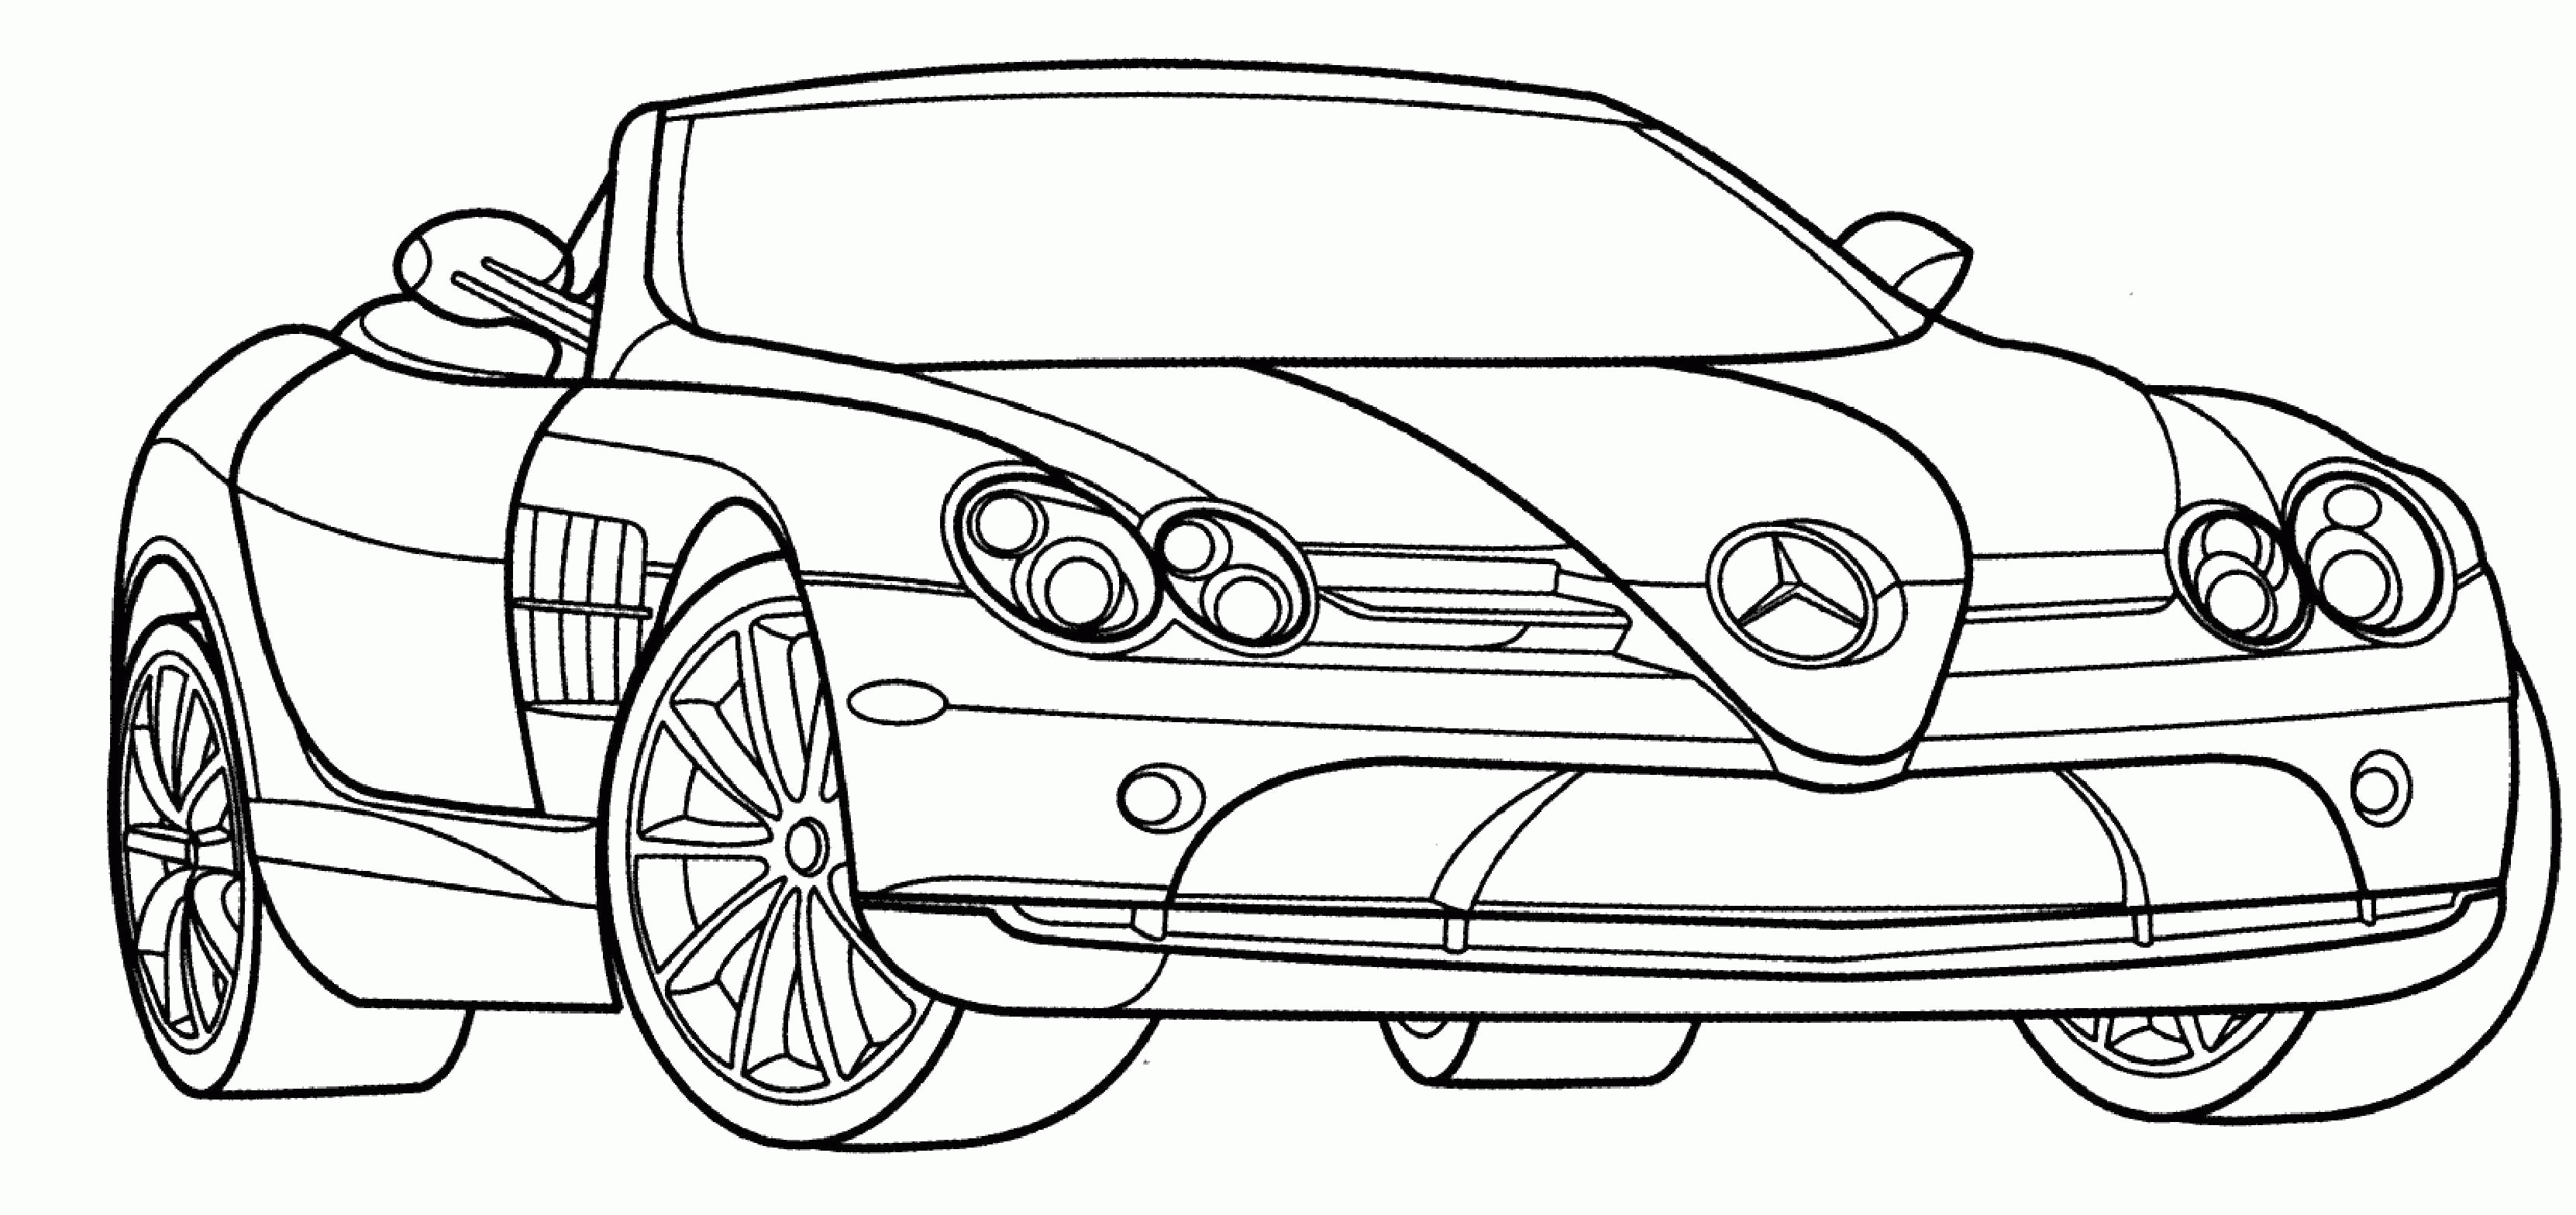 Cars Coloring Pages Pdf Home Nice Sport Resume Format Download